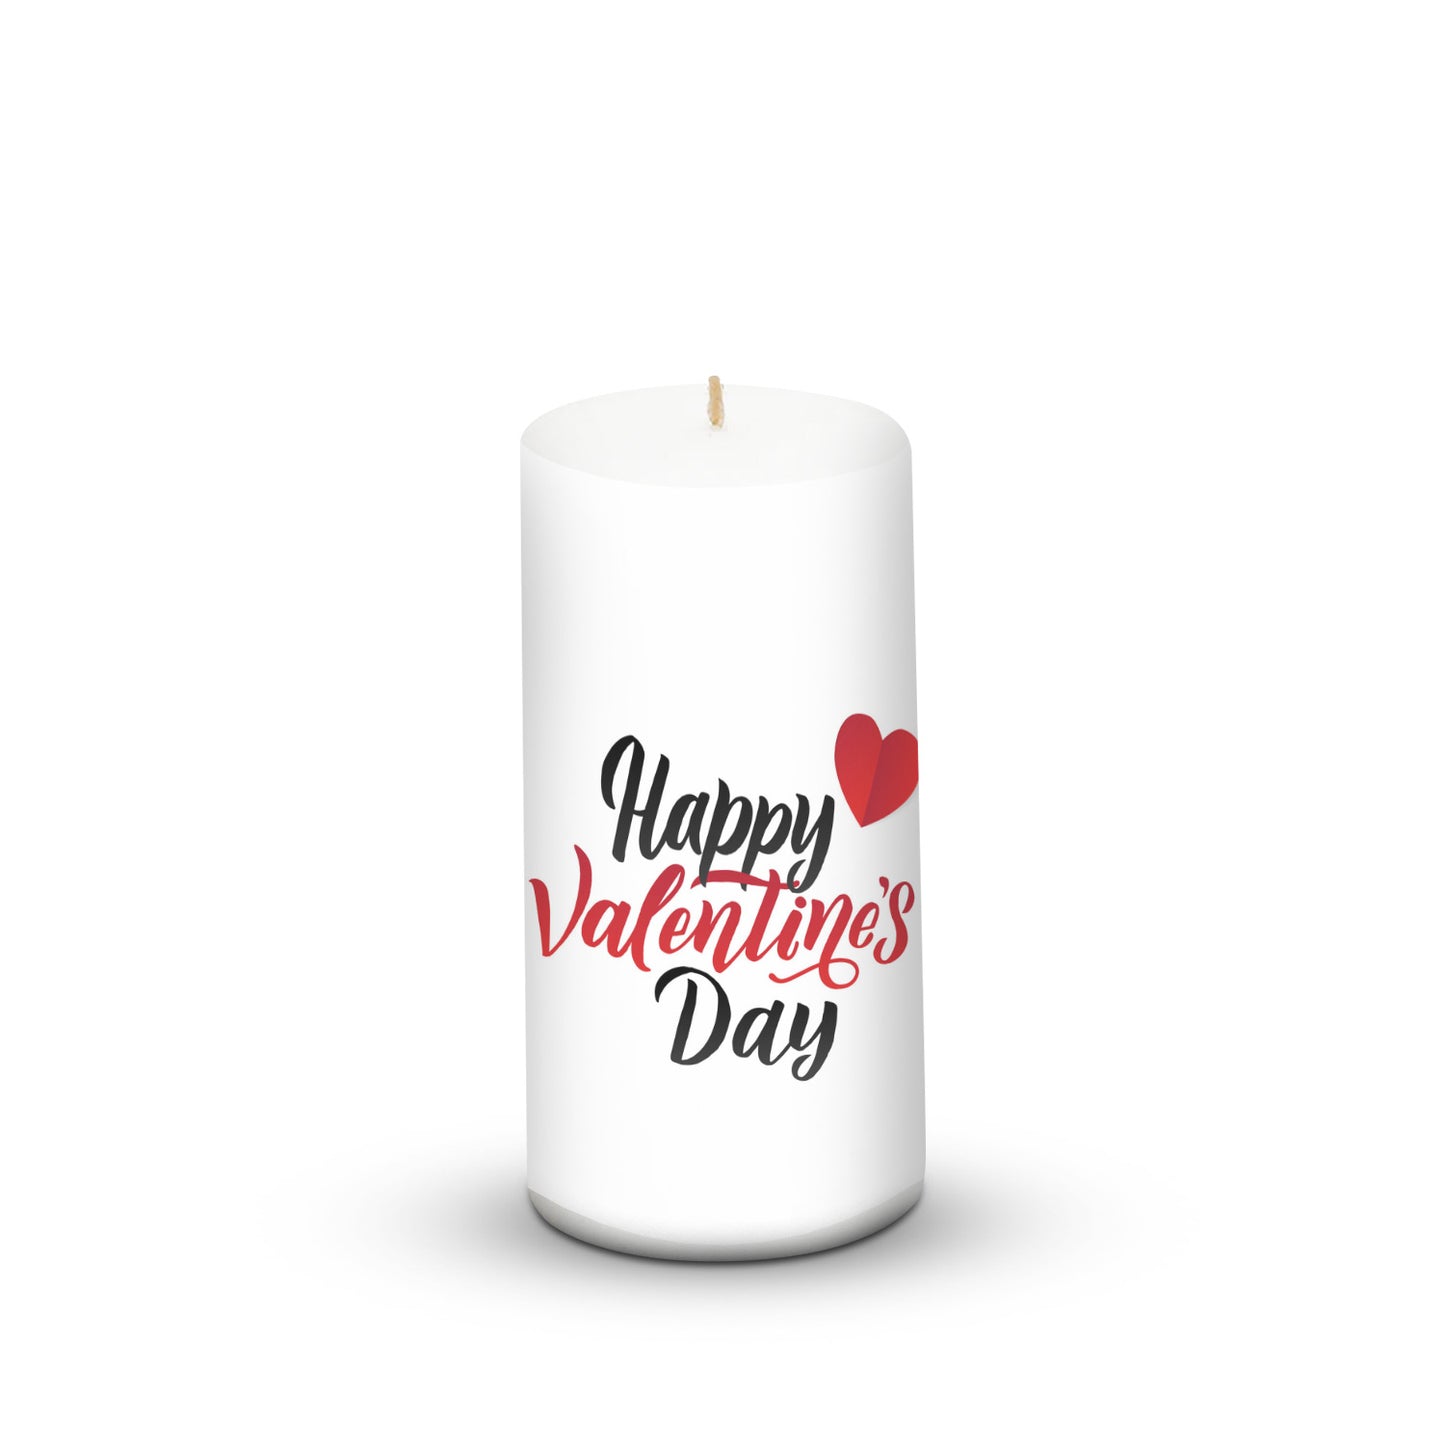 Pillar Valentine Day Heart Candle For Valentines Special 3*6 inch Unscented.